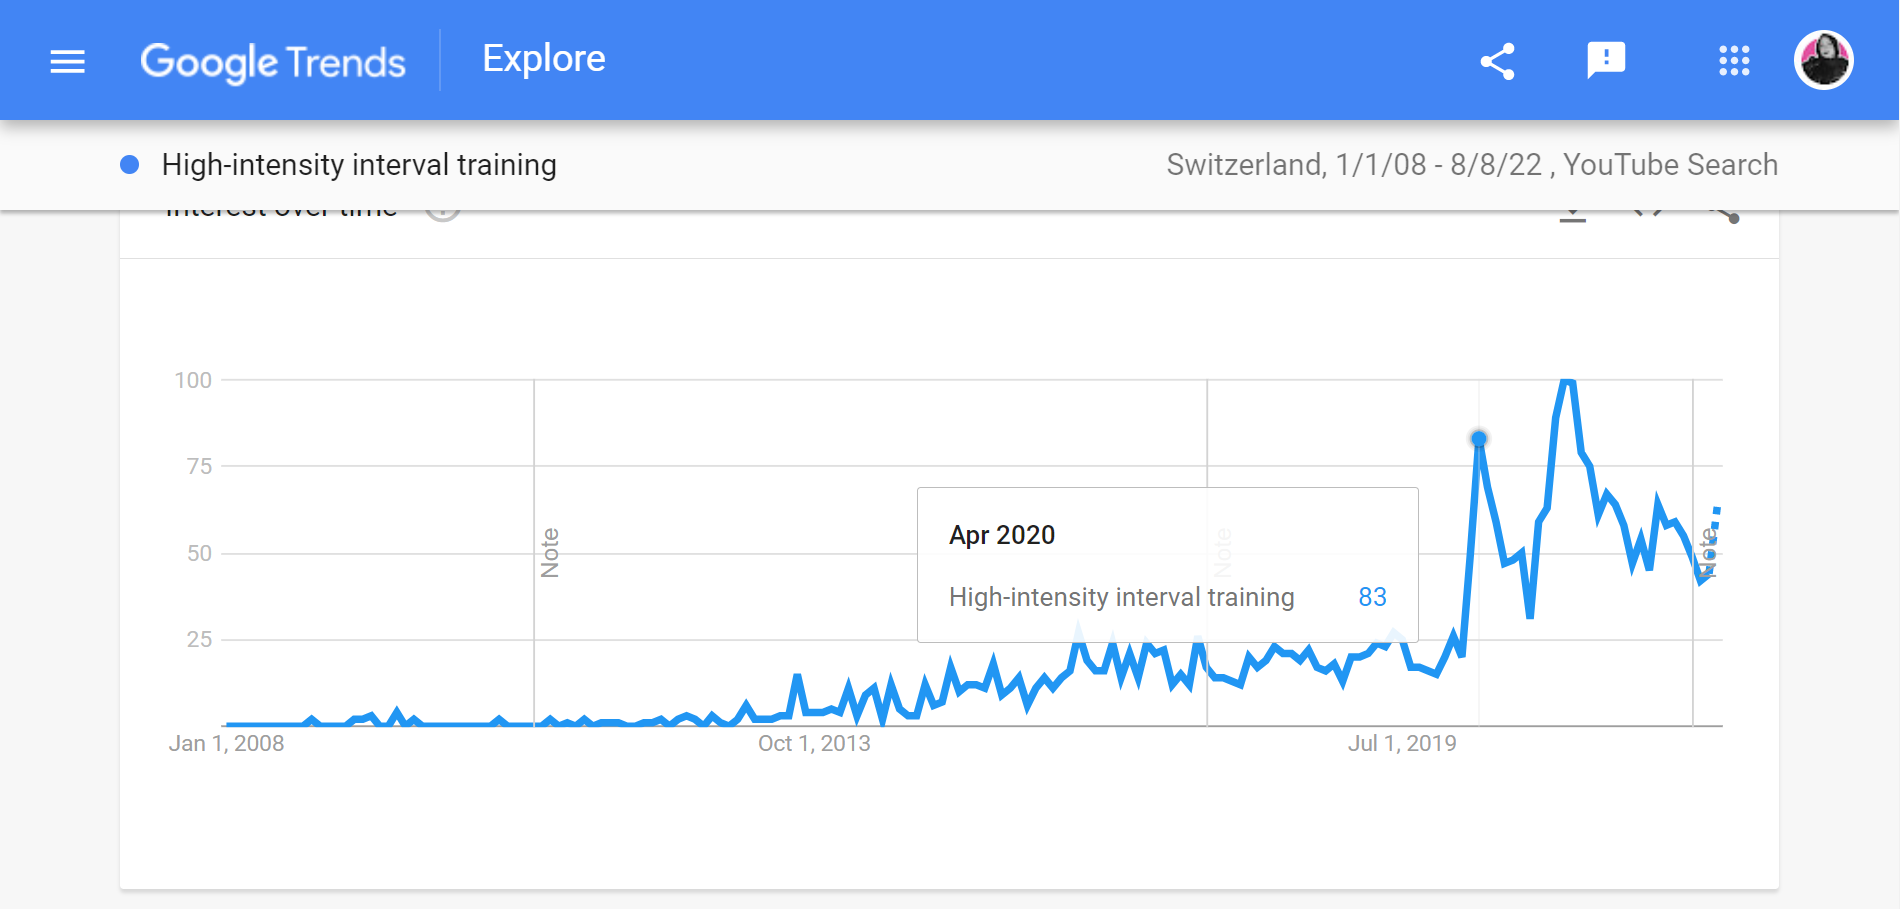 A Screenshot Of The Youtube Search Interest For Hiit Training Over The Years In Switzerland Ever Since 2008 Till August 8, 2022